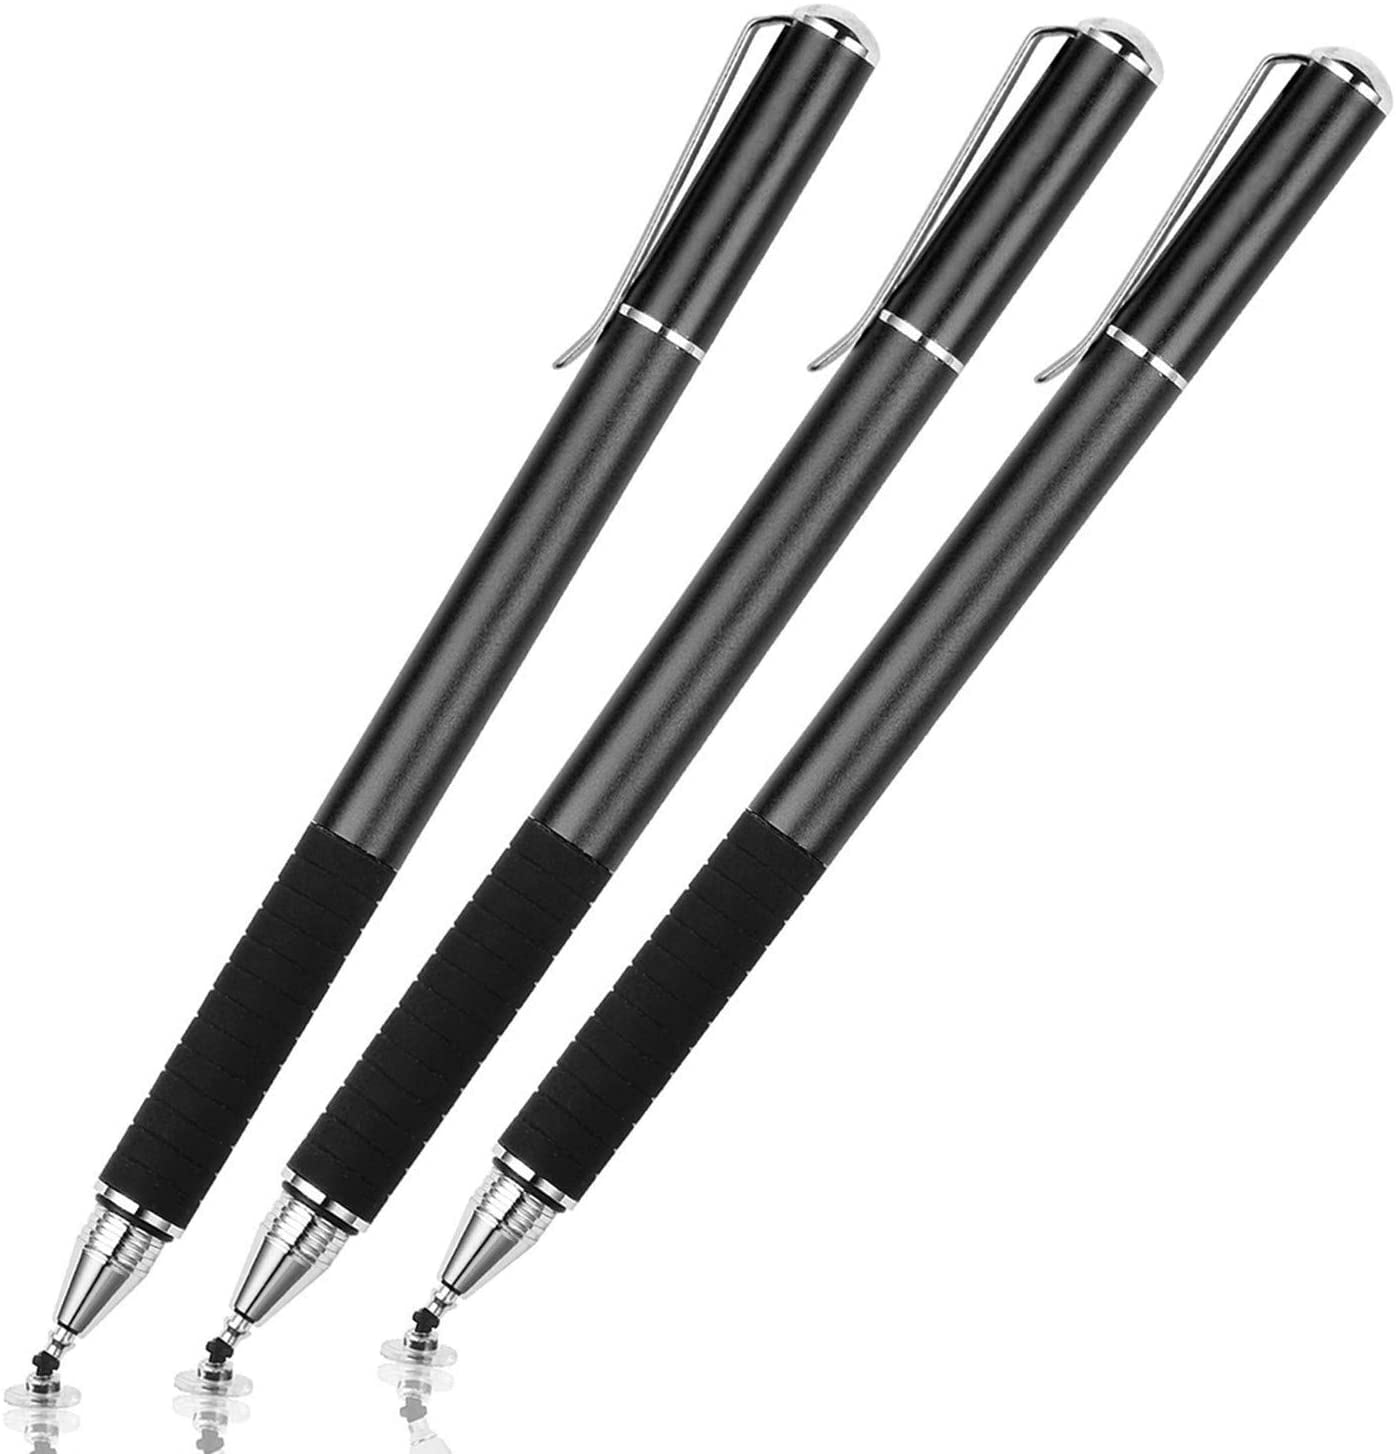 Pack of 2, Mixoo 2-in-1 Precision Disc & Fiber Tip Stylus with 6 Extra Replaceable Tips for Tablet/iphone/Computer/ipad & Capacitive Touch Screen Devices Black/Black 